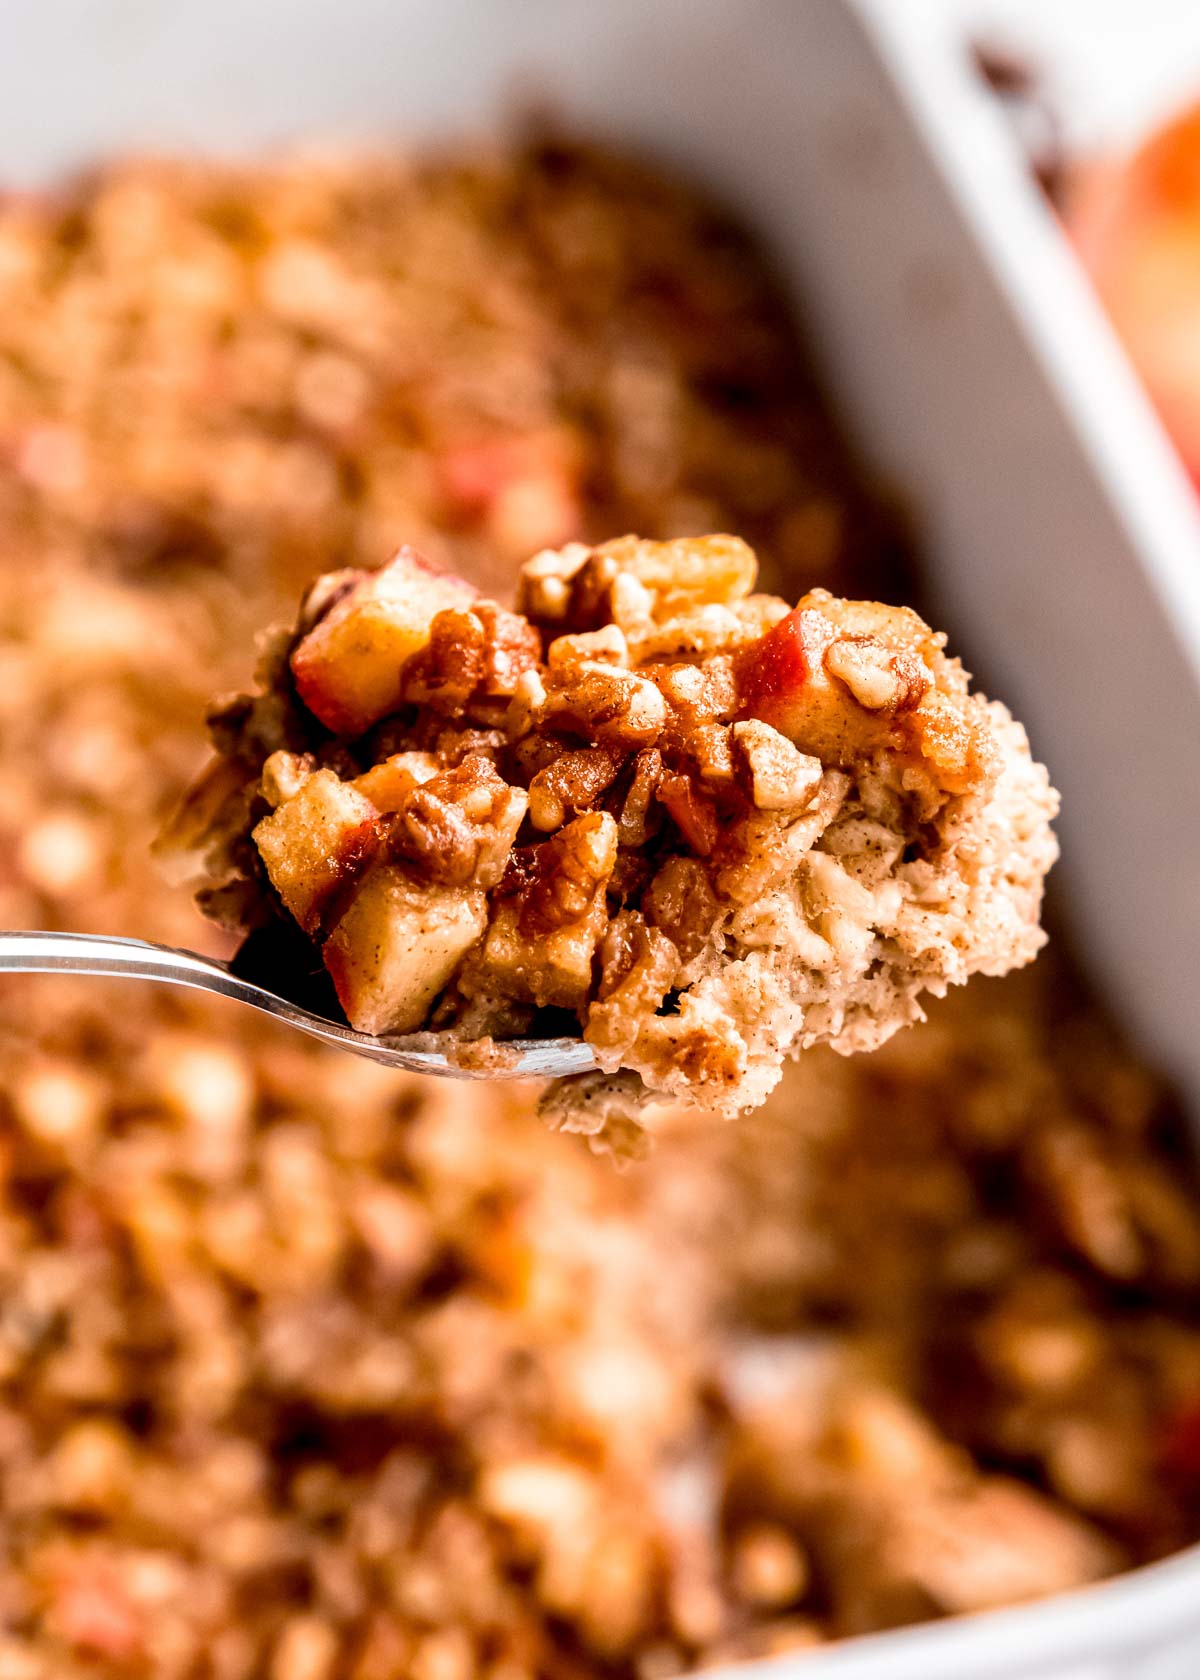 a closeup of a large spoon full of baked oatmeal with apples, cinnamon, and pecans